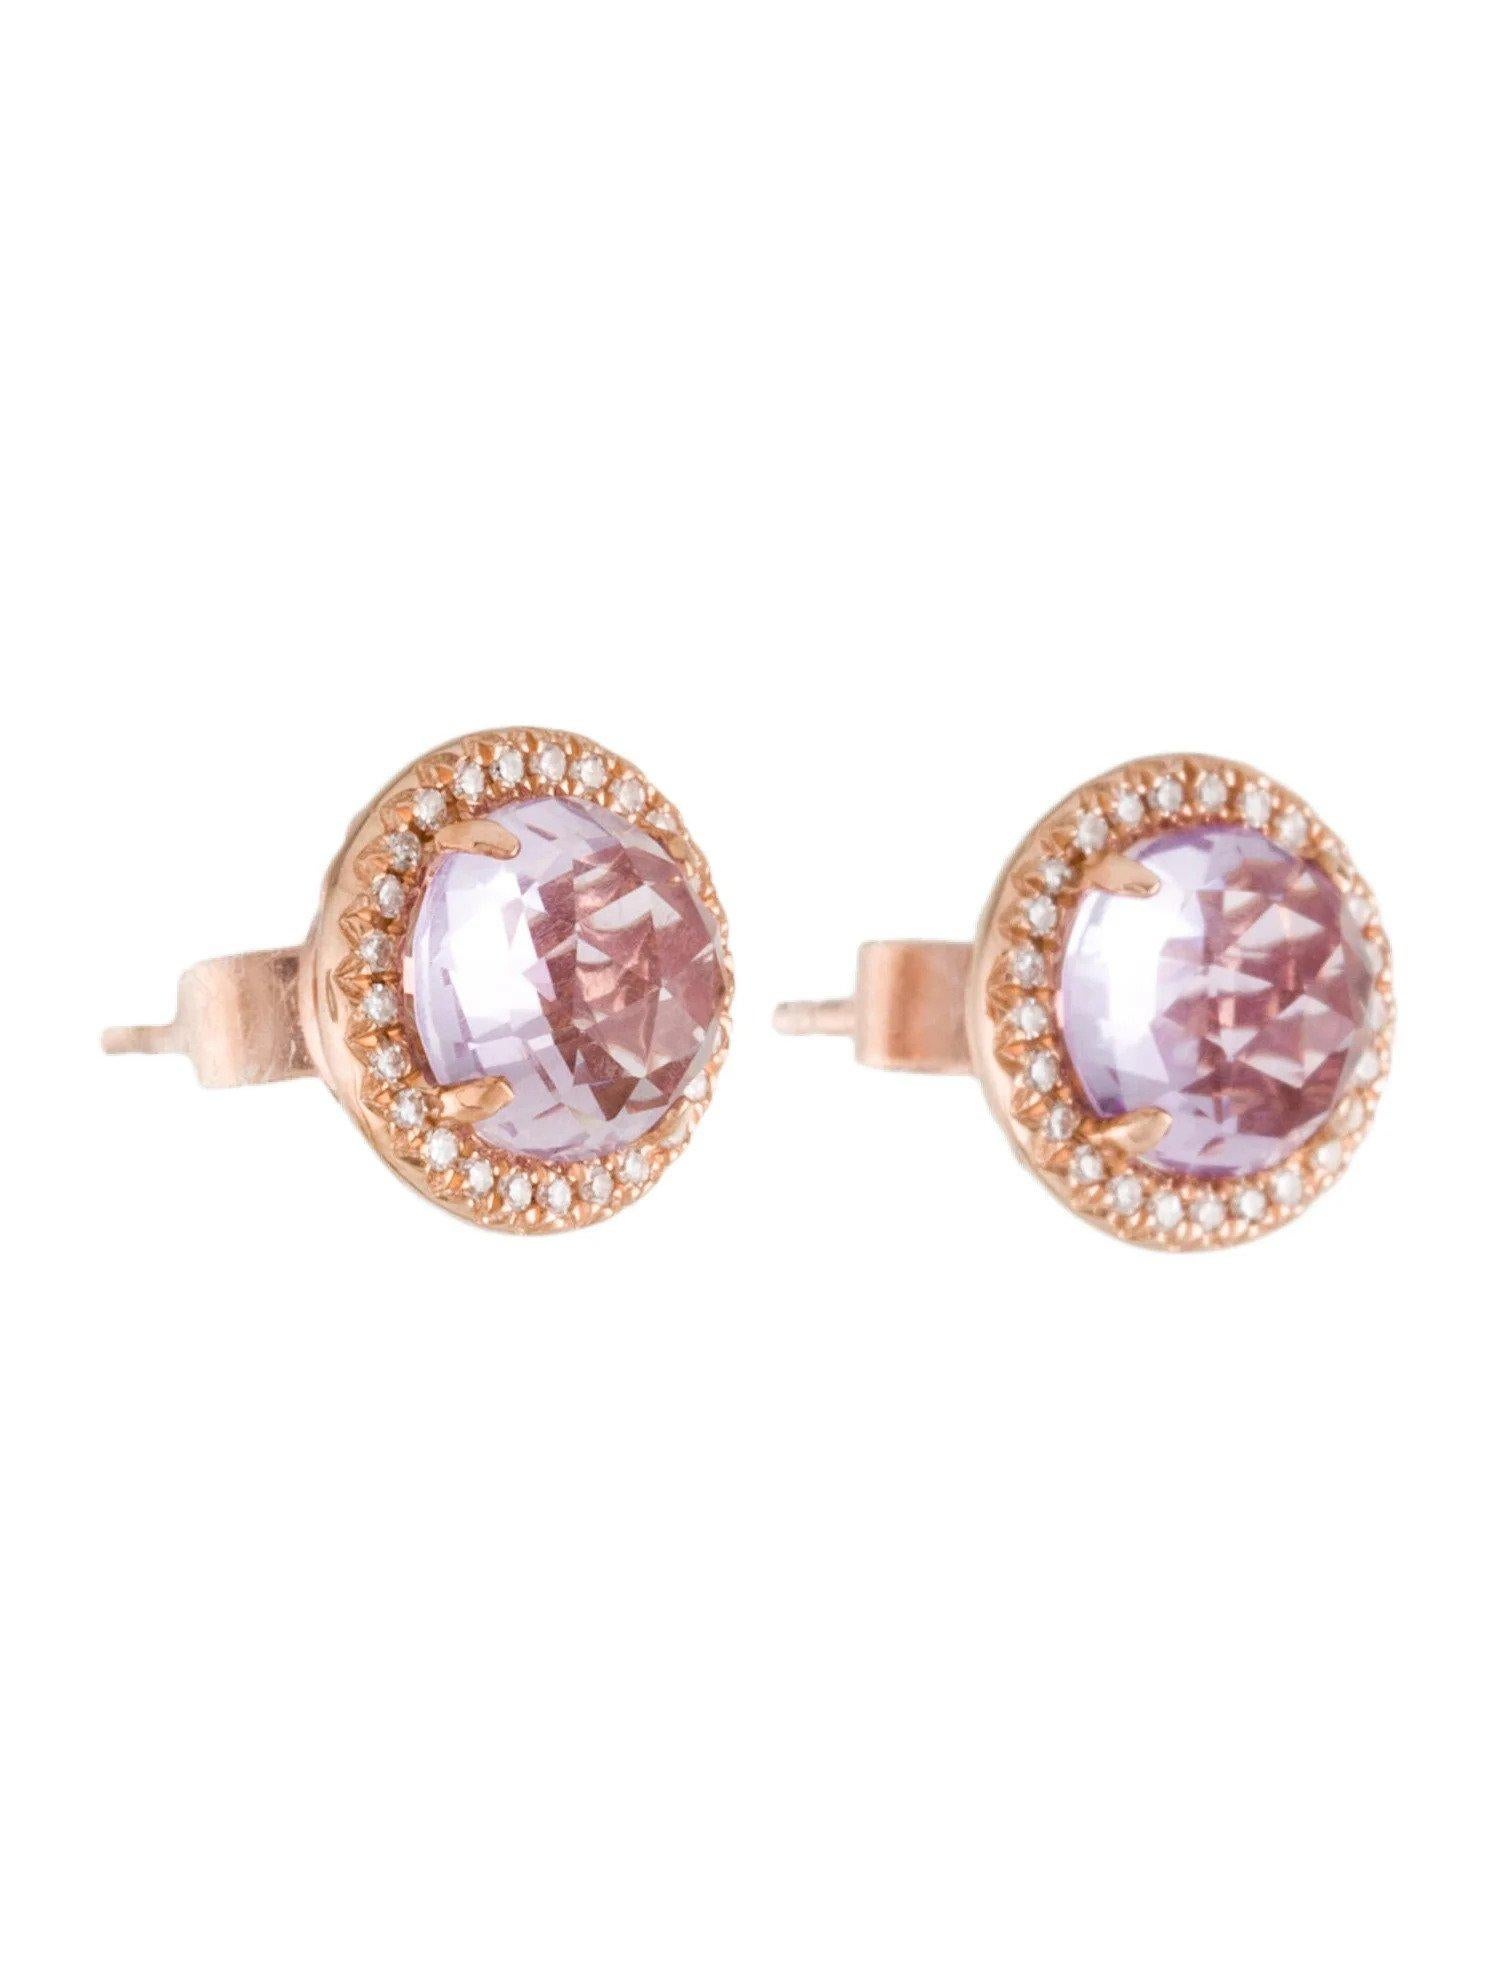 1.86 Carat Round Amethyst & Diamond Rose Gold Stud Earrings In New Condition For Sale In Great Neck, NY